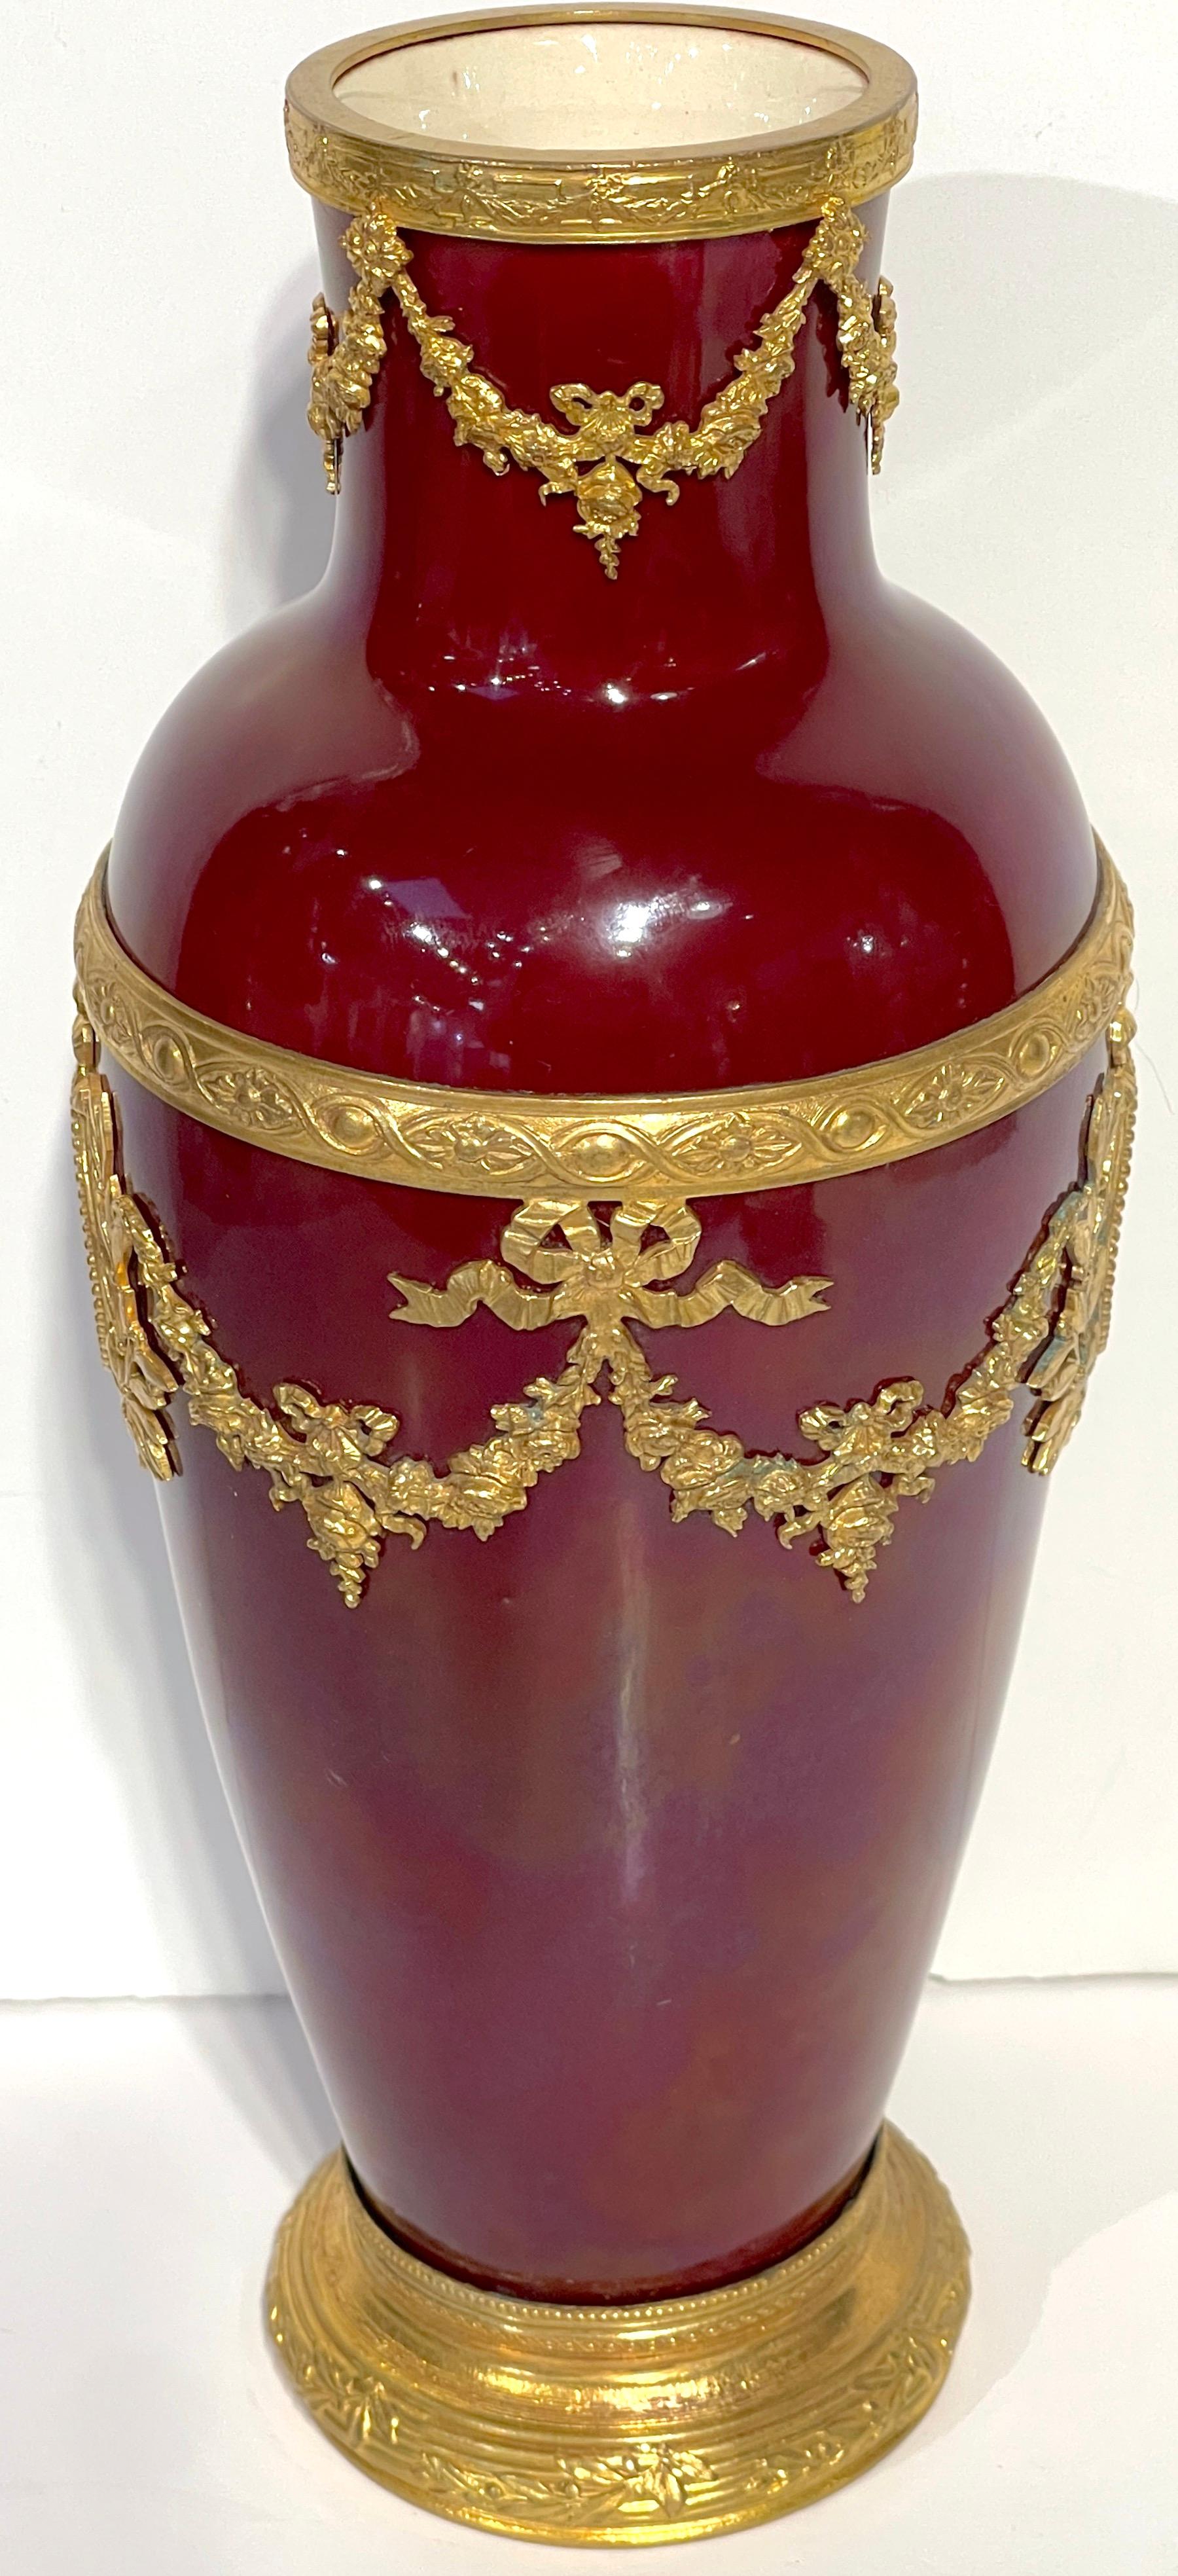 Paul Milet for Sevres Red Flambe Ormolu Mounted Neoclassical Vase  In Good Condition For Sale In West Palm Beach, FL